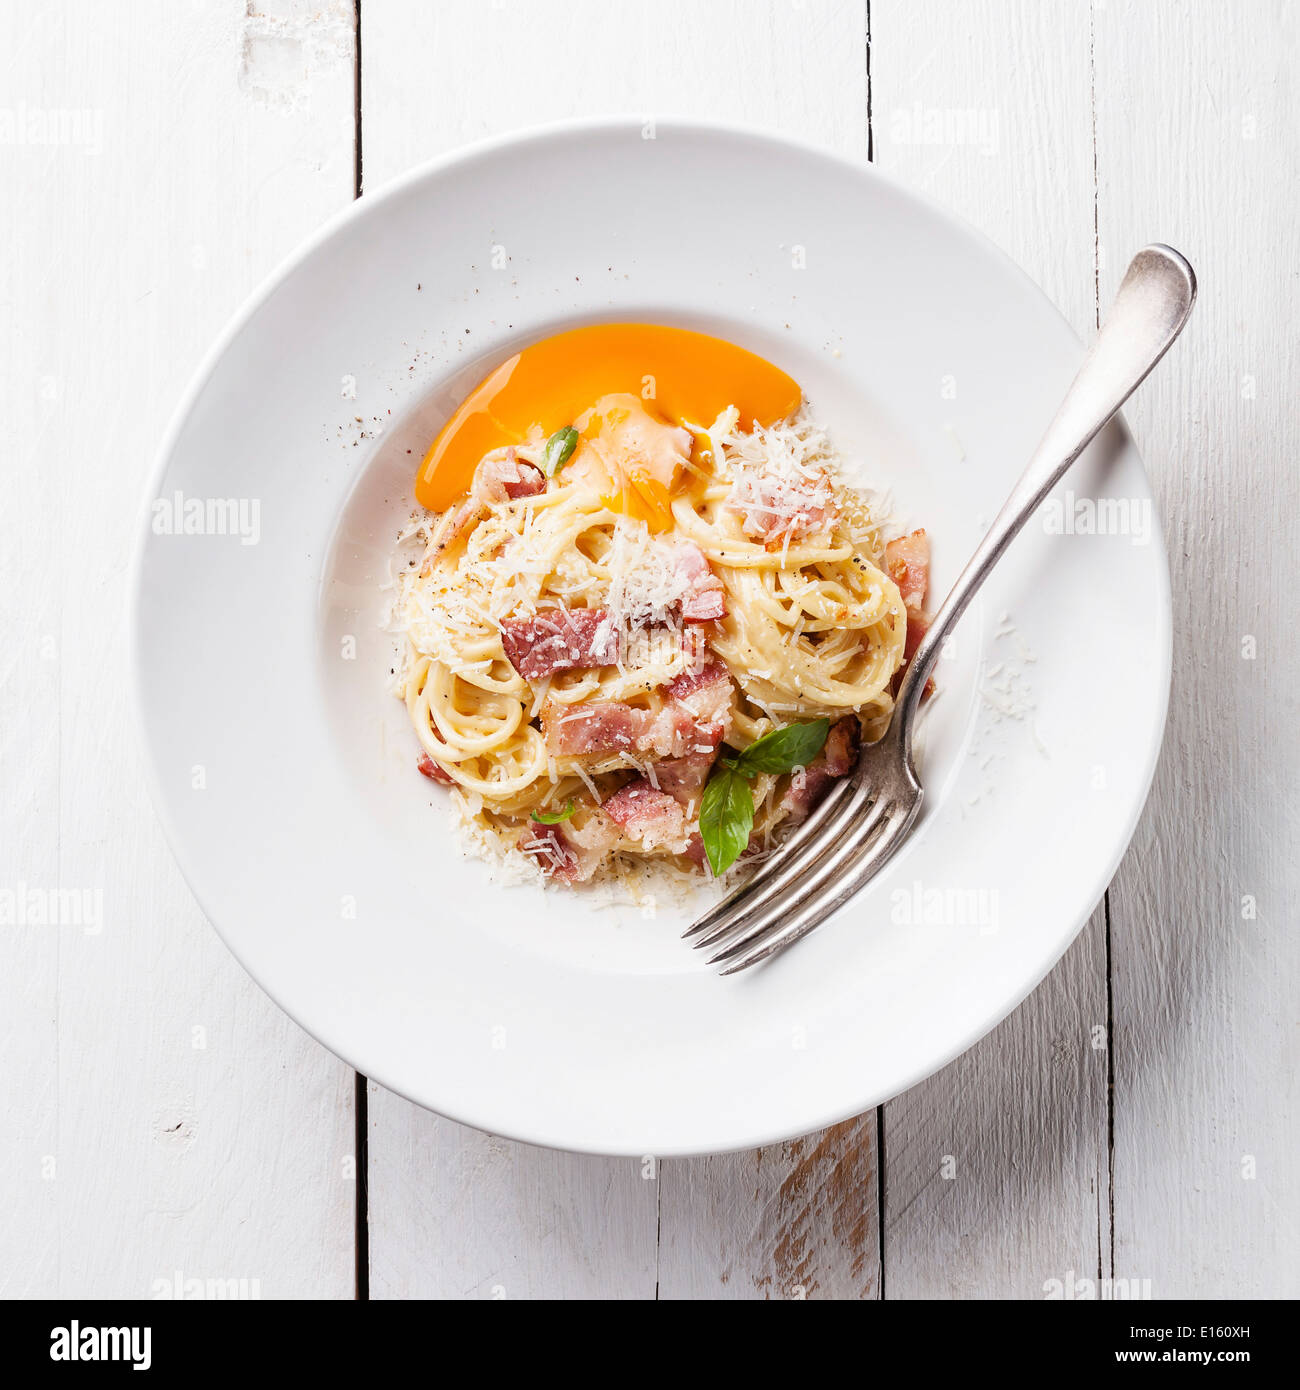 Pasta Carbonara on white plate with parmesan and yolk Stock Photo